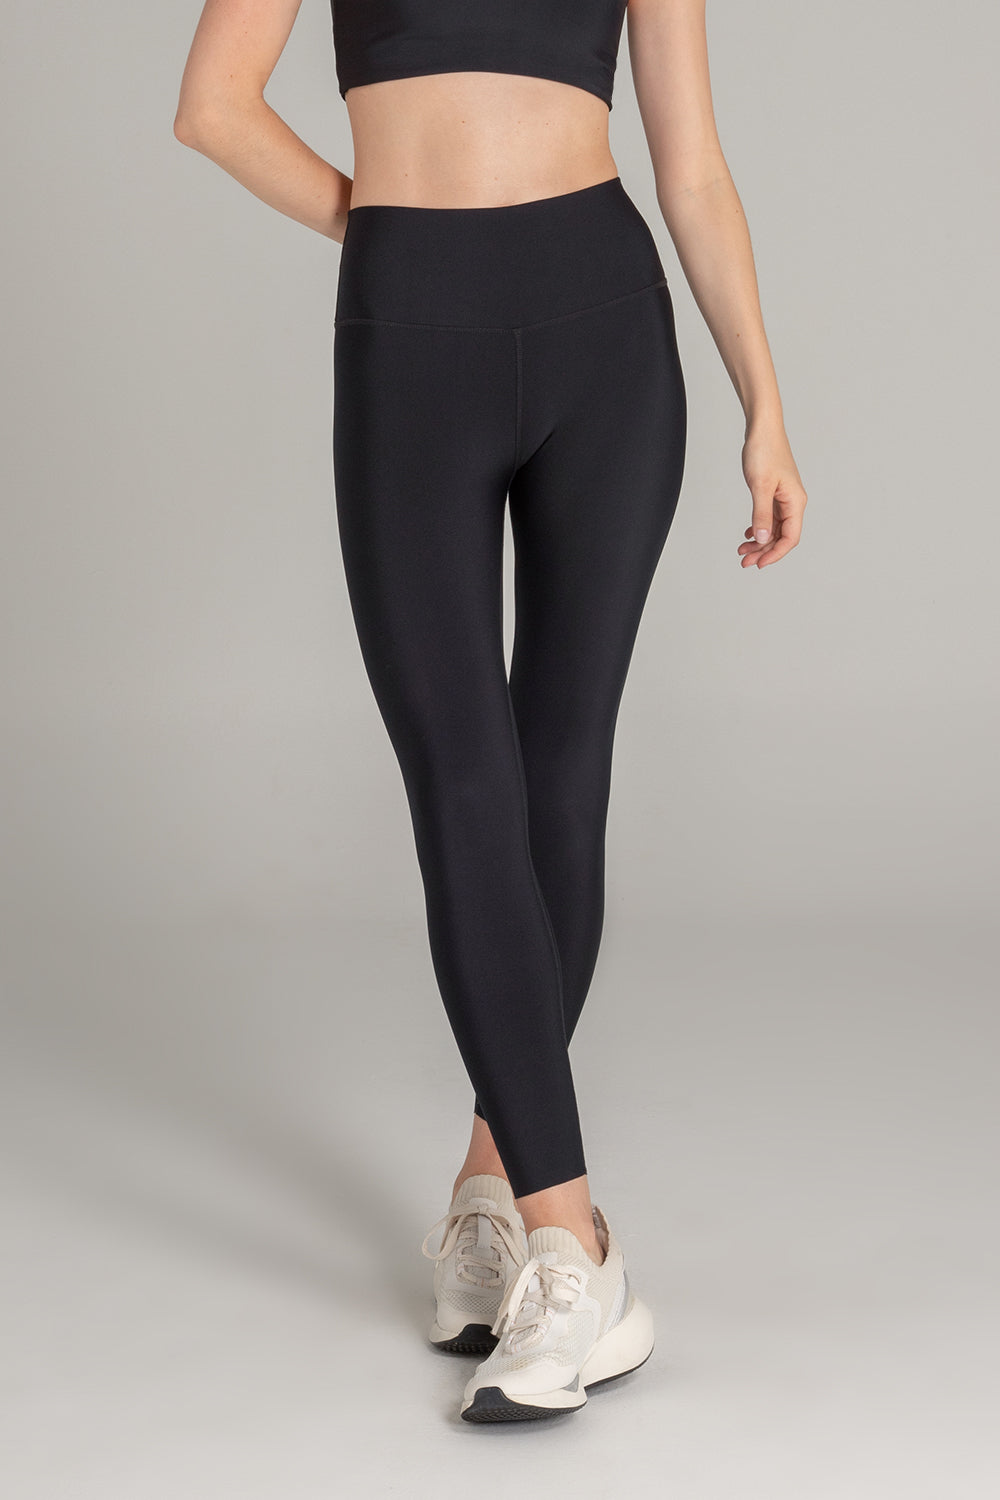 The Different Types of Leggings – Innitiwear